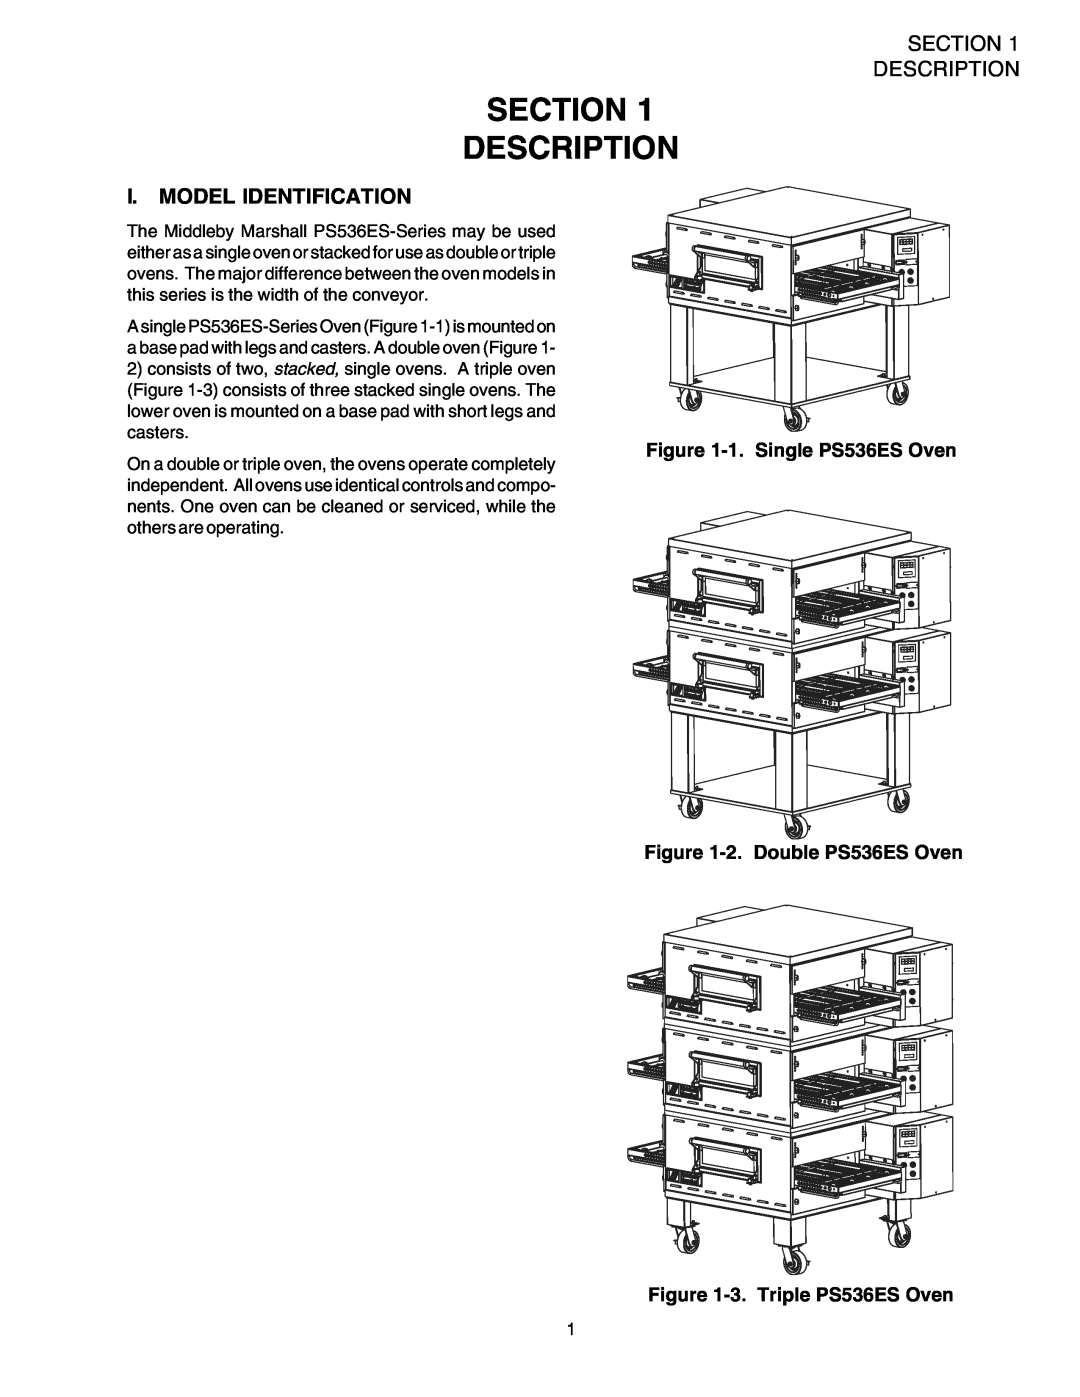 Middleby Marshall installation manual Section Description, I. Model Identification, 1. Single PS536ES Oven 